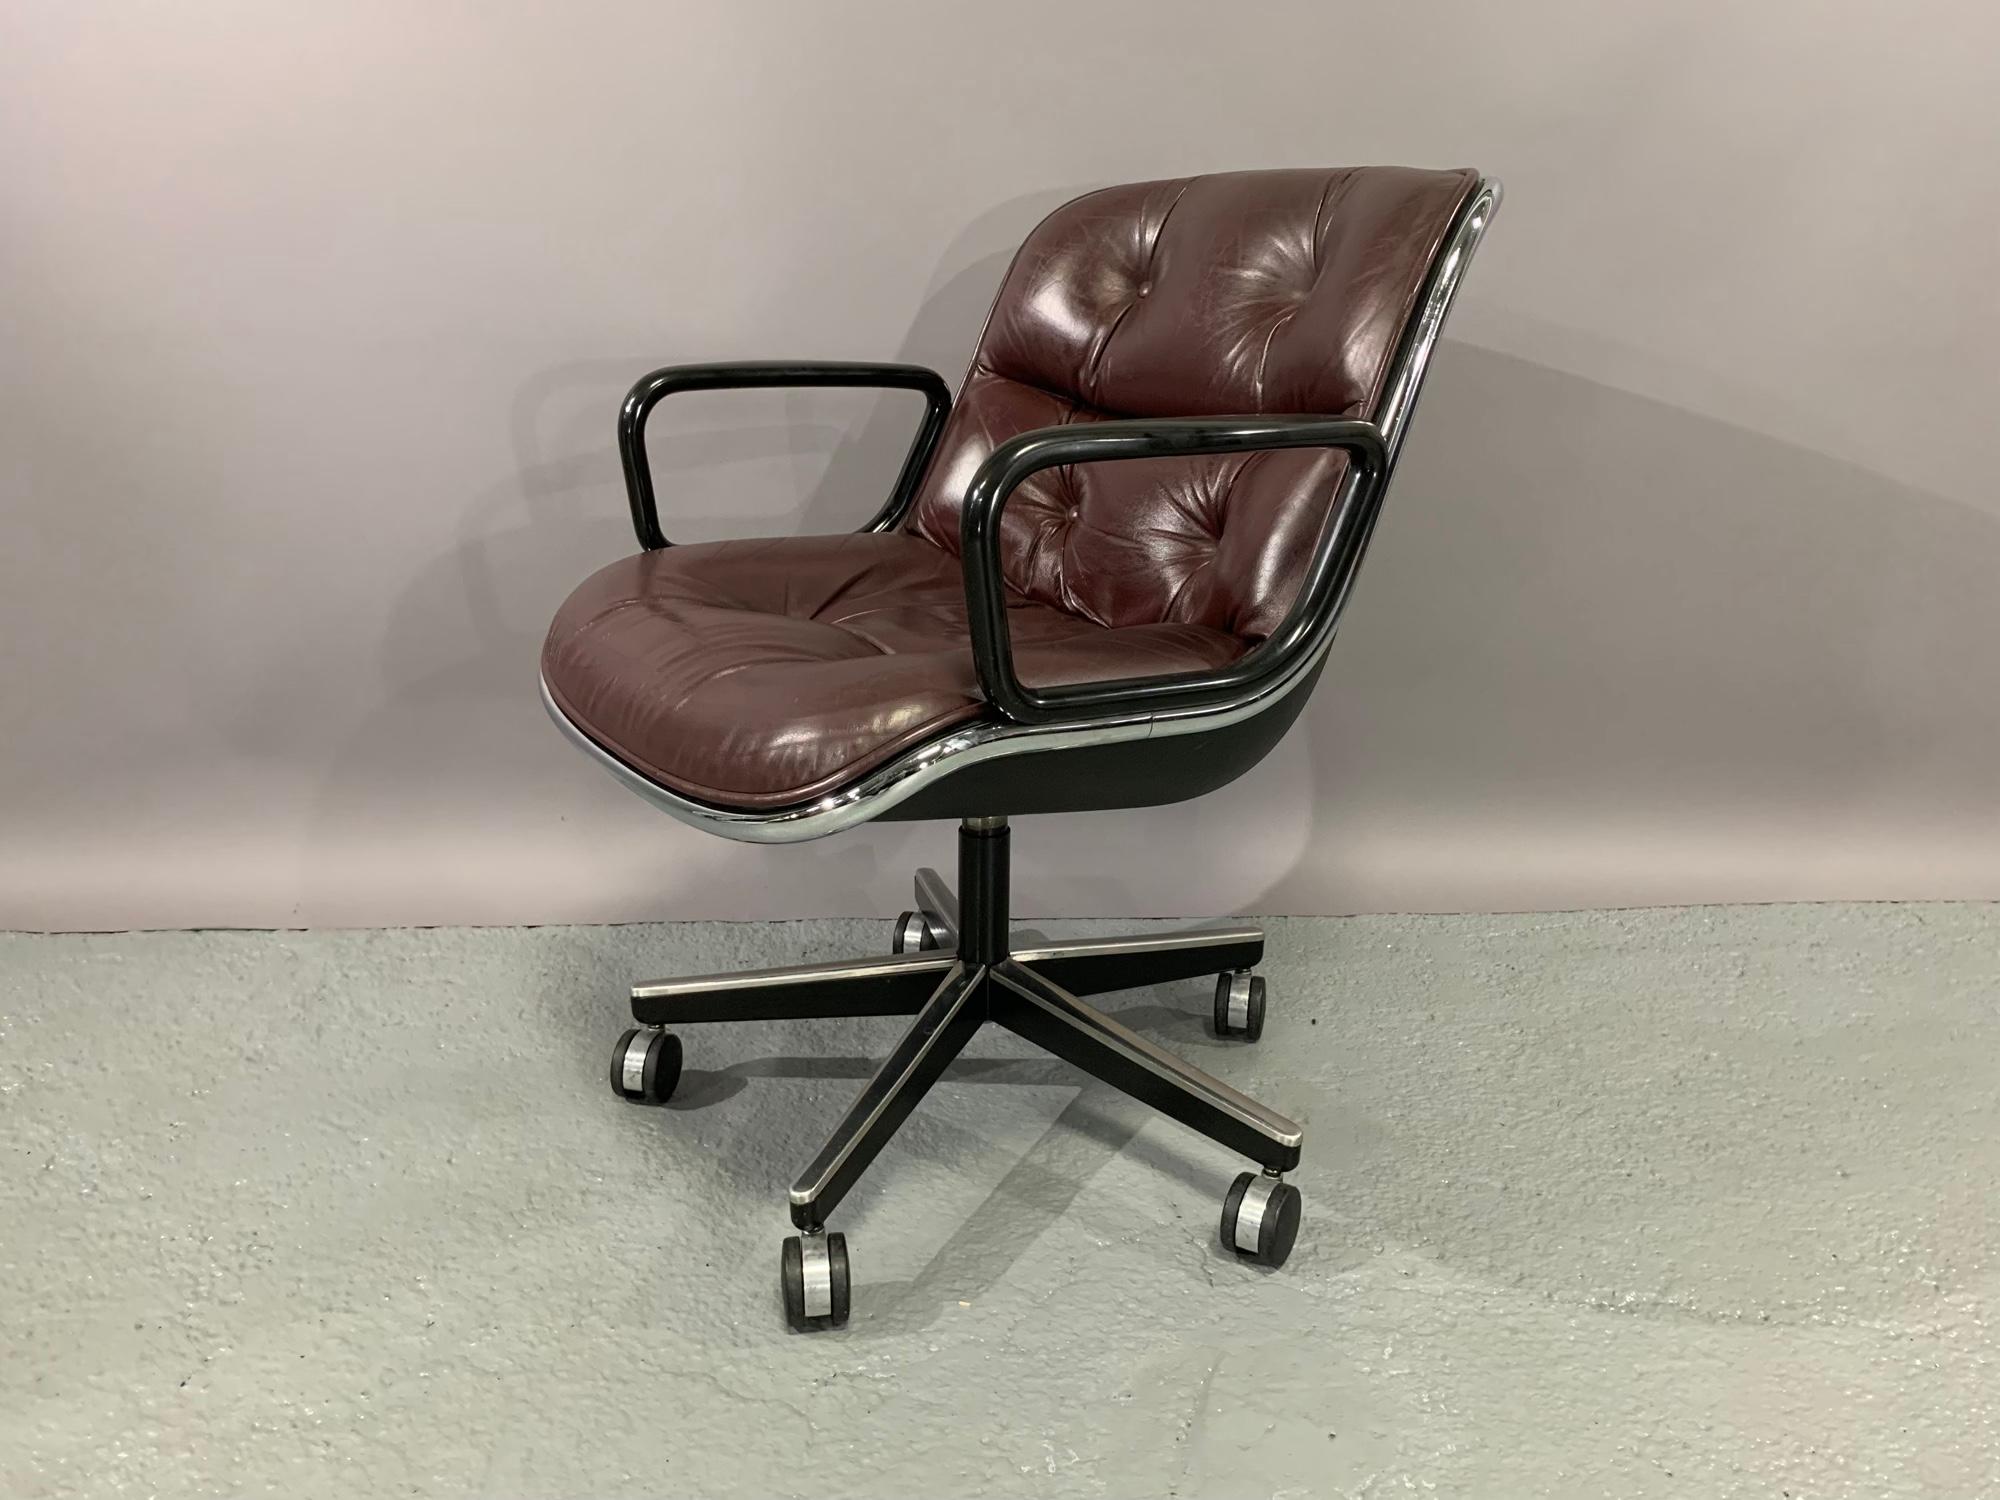 Set of four (4) executive chairs designed by Charles Pollock in 1965 for Knoll International in cordovan leather. This comfortable chair, equally suited for the office, board room or the home, is considered one of Knoll’s most memorable designs. It